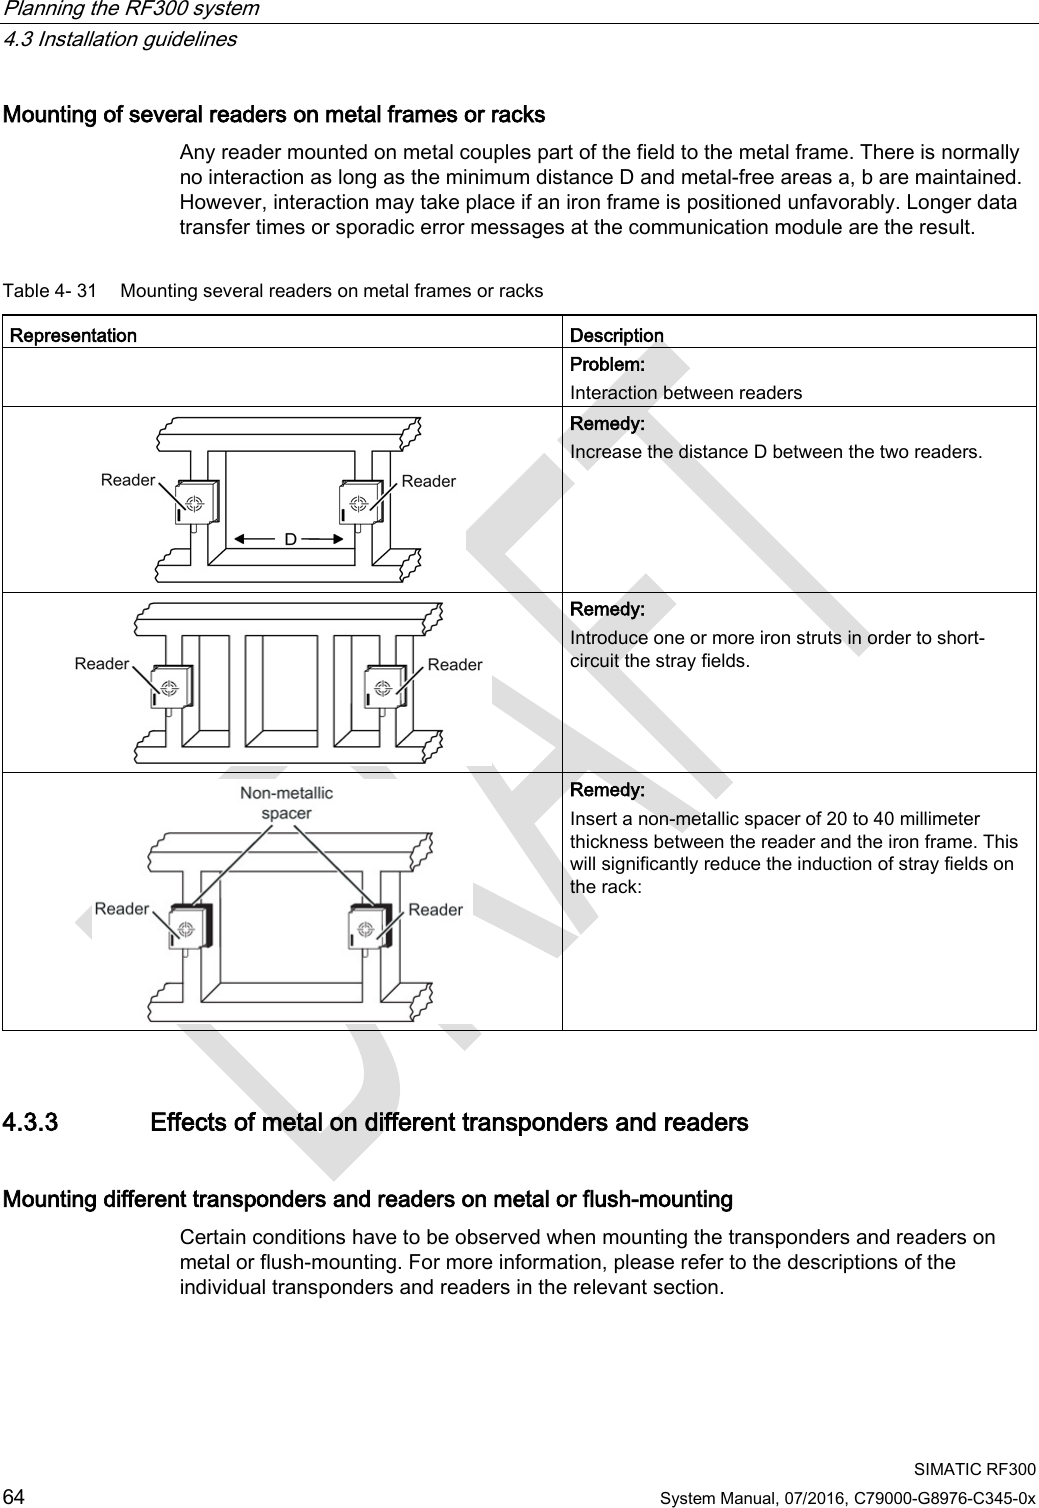 Planning the RF300 system   4.3 Installation guidelines  SIMATIC RF300 64 System Manual, 07/2016, C79000-G8976-C345-0x Mounting of several readers on metal frames or racks Any reader mounted on metal couples part of the field to the metal frame. There is normally no interaction as long as the minimum distance D and metal-free areas a, b are maintained. However, interaction may take place if an iron frame is positioned unfavorably. Longer data transfer times or sporadic error messages at the communication module are the result. Table 4- 31 Mounting several readers on metal frames or racks Representation Description  Problem: Interaction between readers  Remedy: Increase the distance D between the two readers.  Remedy: Introduce one or more iron struts in order to short-circuit the stray fields.  Remedy: Insert a non-metallic spacer of 20 to 40 millimeter thickness between the reader and the iron frame. This will significantly reduce the induction of stray fields on the rack:  4.3.3 Effects of metal on different transponders and readers Mounting different transponders and readers on metal or flush-mounting Certain conditions have to be observed when mounting the transponders and readers on metal or flush-mounting. For more information, please refer to the descriptions of the individual transponders and readers in the relevant section. 